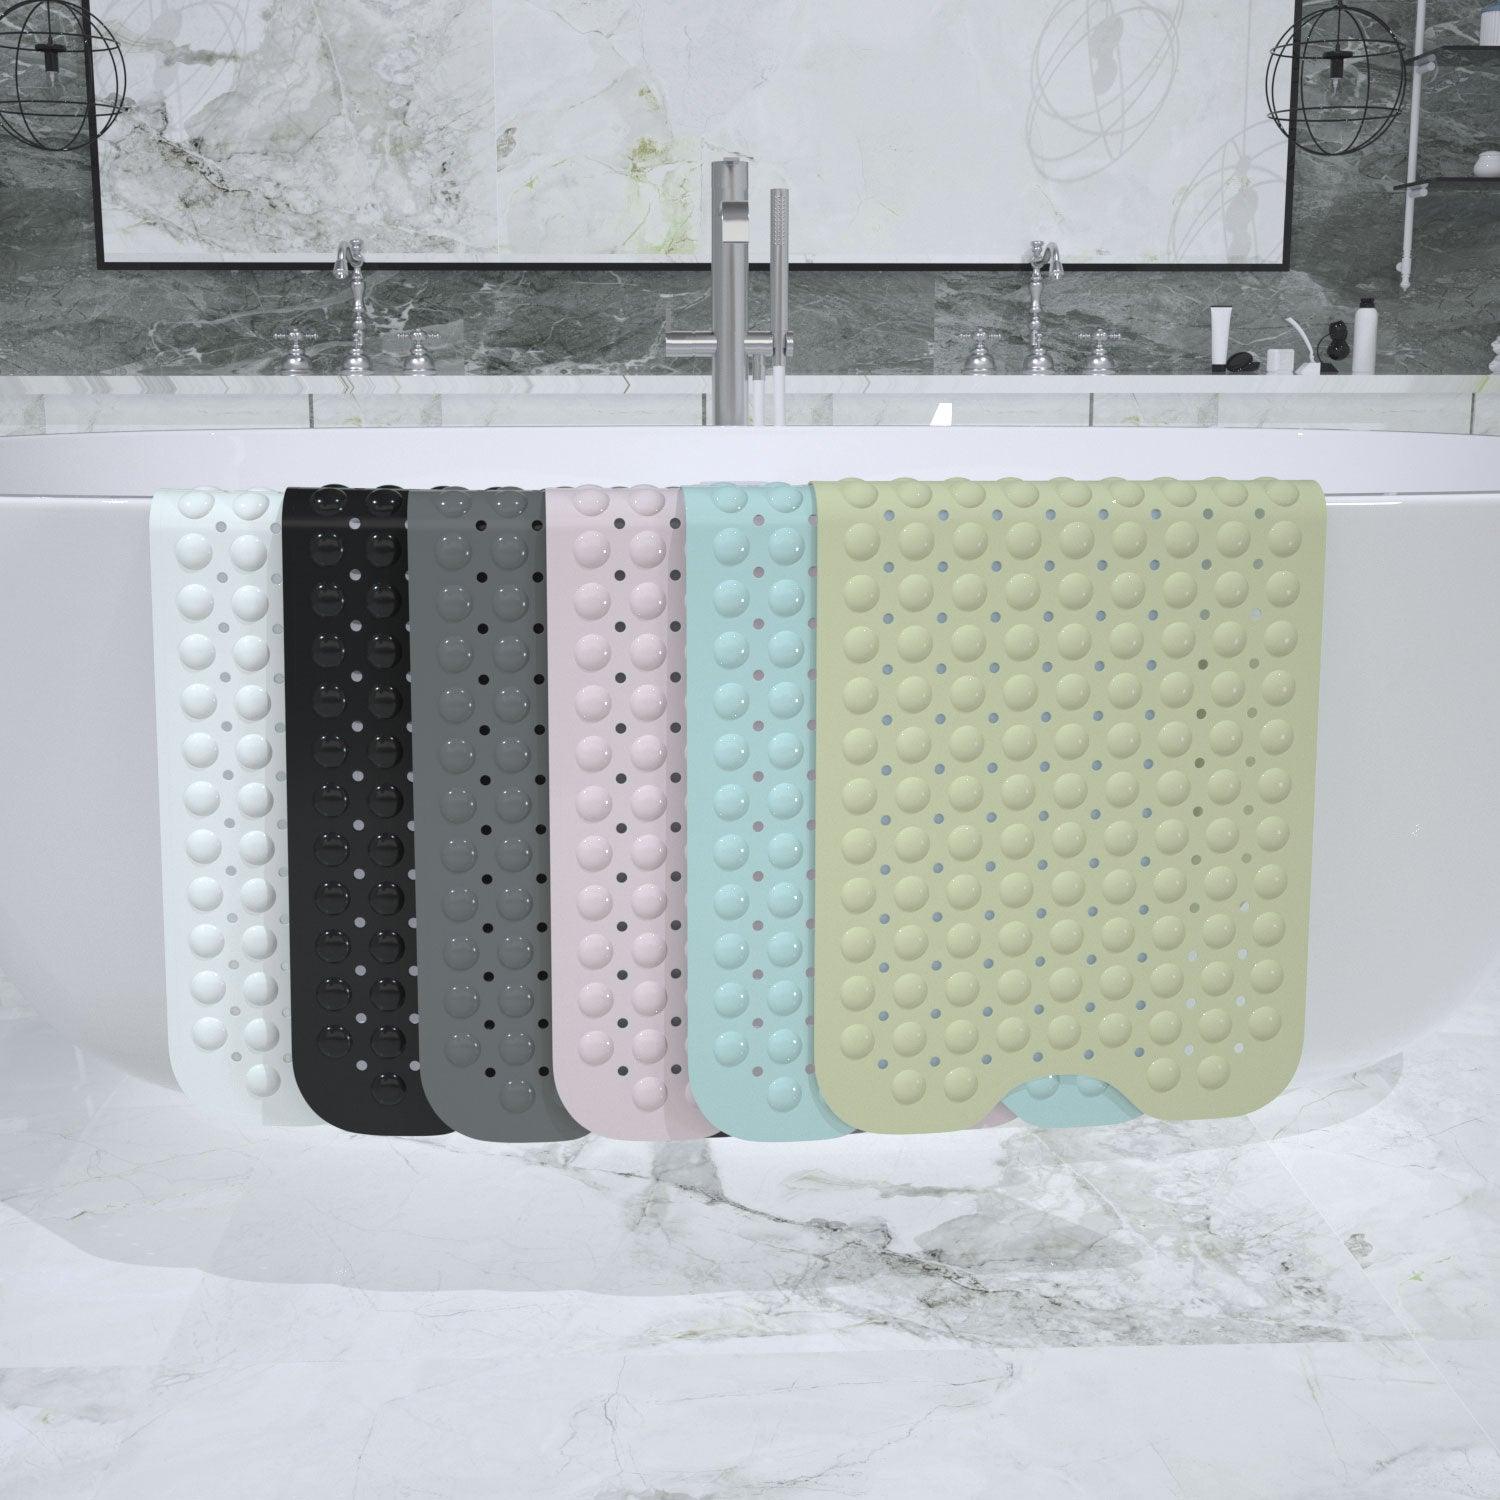 Yimobra Original Bath Tub Shower Mat Extra Long 16 x 40 Inch, Non-Slip with  Drain Holes, Suction Cups, Phthalate Free, Latex Free, BPA Free and